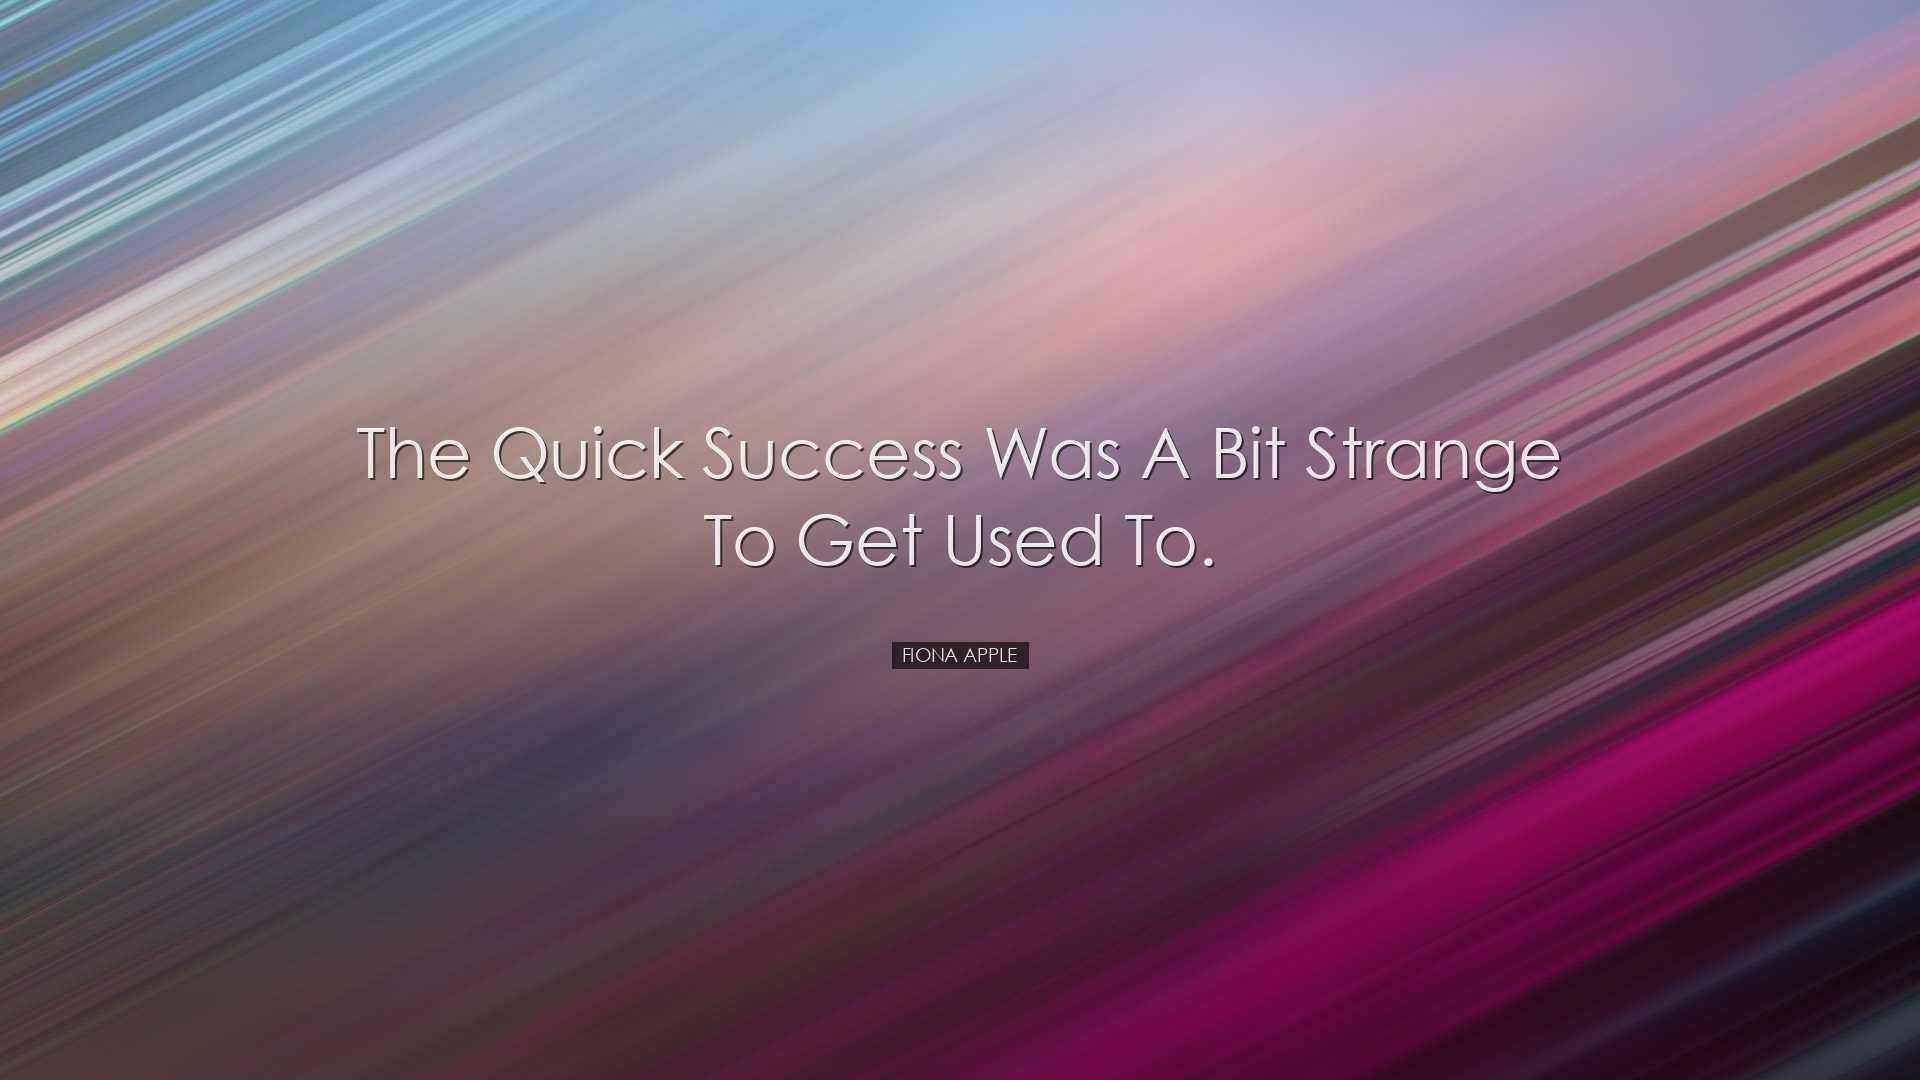 The quick success was a bit strange to get used to. - Fiona Apple